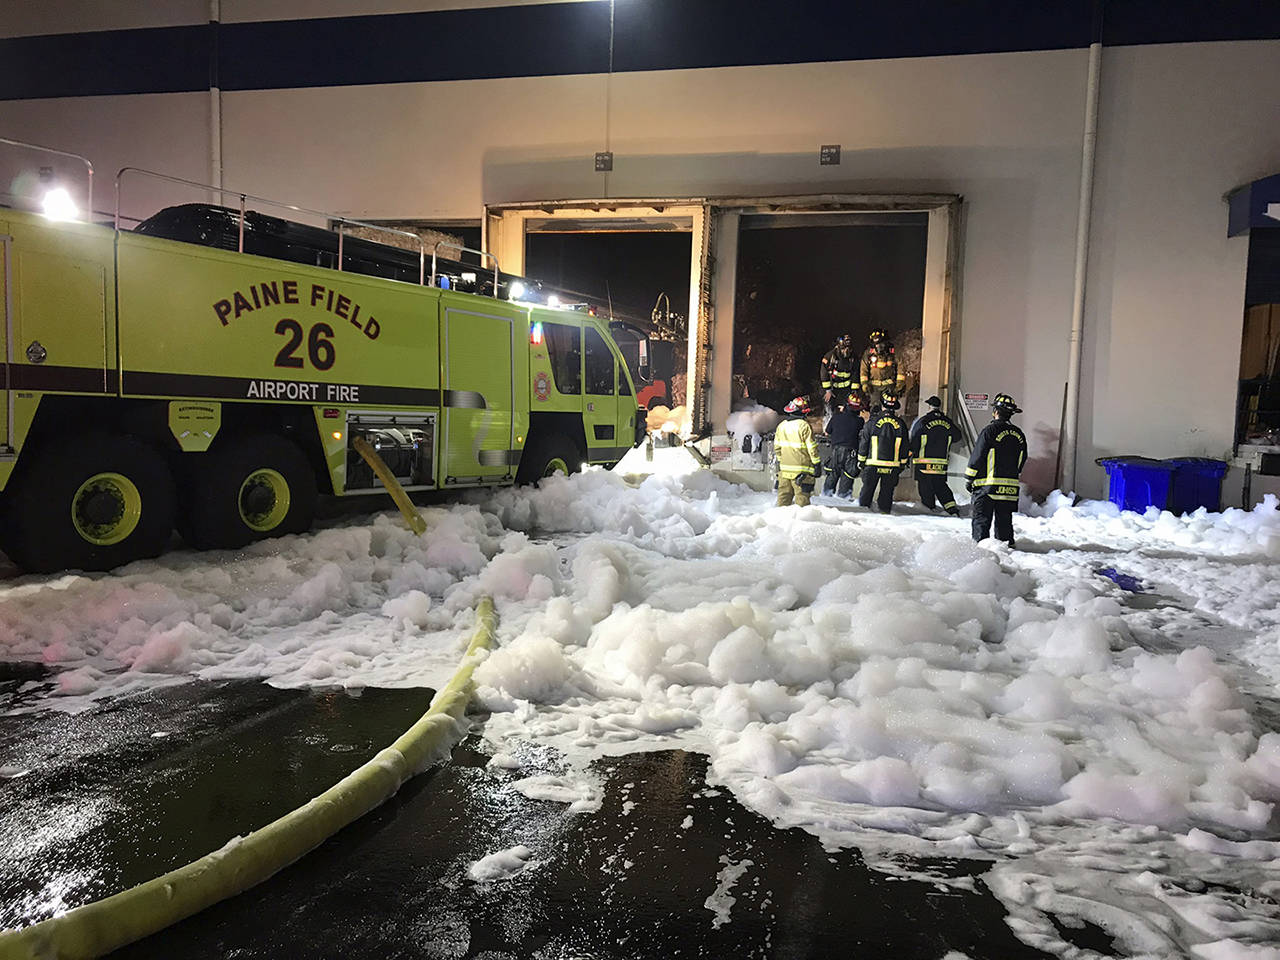 Firefighters were able to keep damage from a fire at a paper recycling warehouse near Paine Field to a minimum, officials said. (South County Fire)